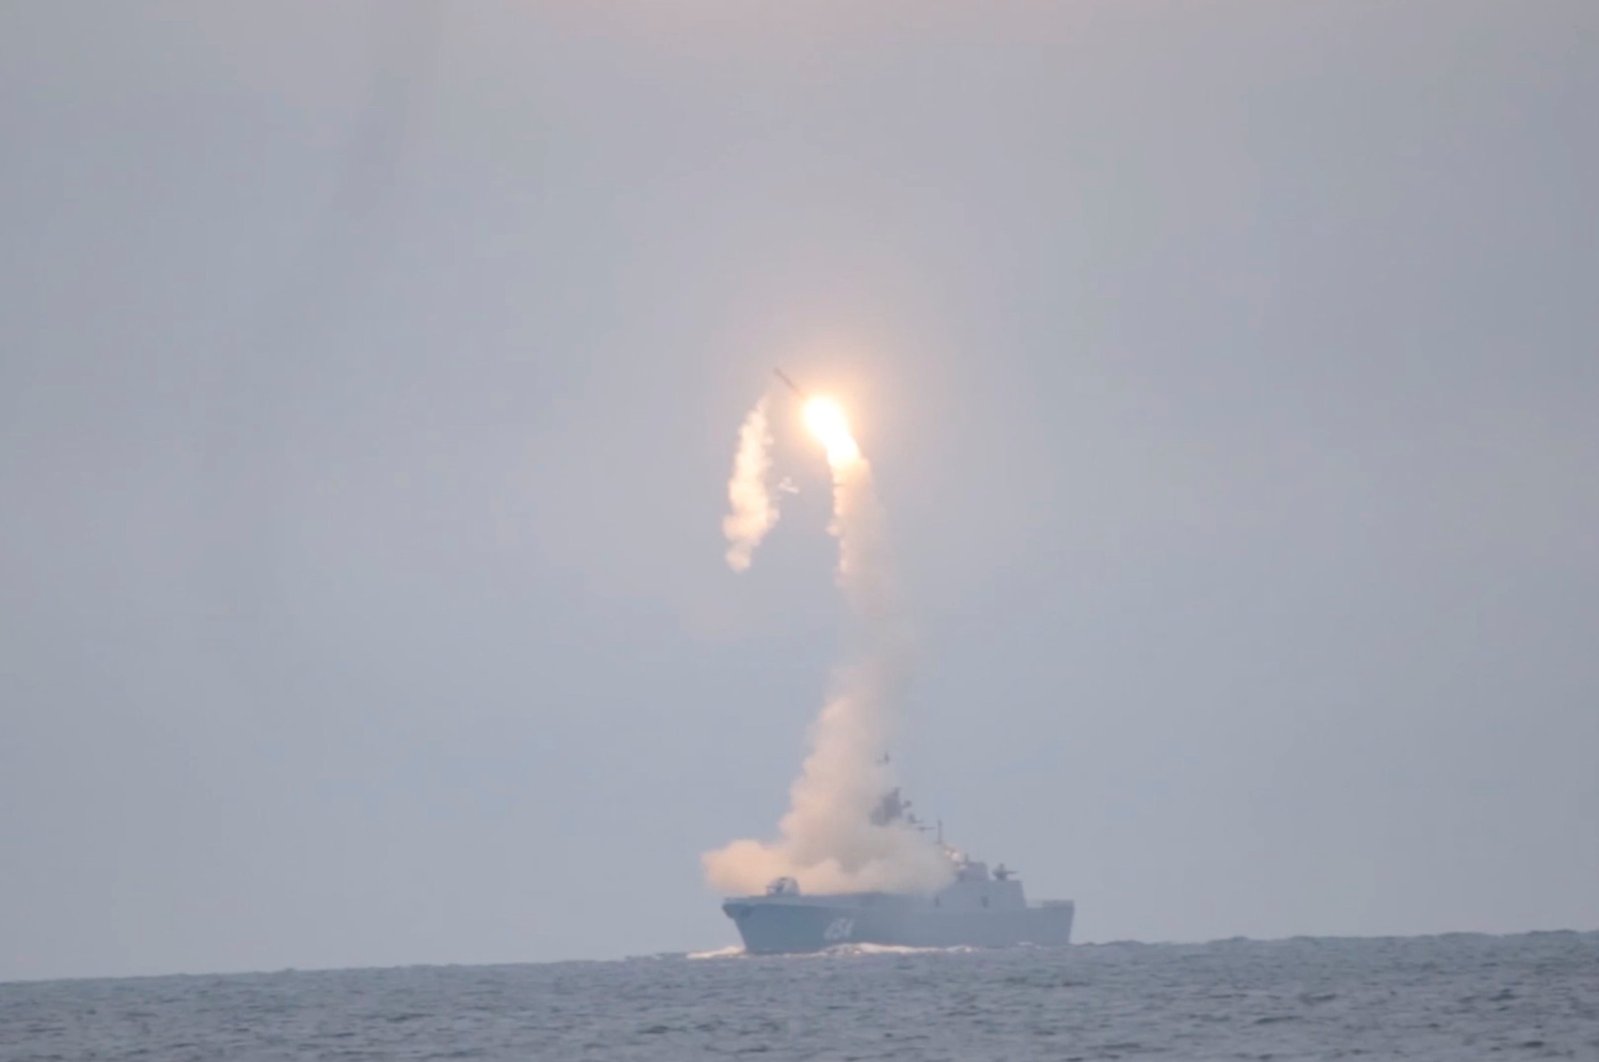 Tsirkon hypersonic cruise missile is launched from the Russian guided-missile frigate Admiral Gorshkov during a test in the White Sea, in this still image taken from video released October 7, 2020. (Reuters Photo)